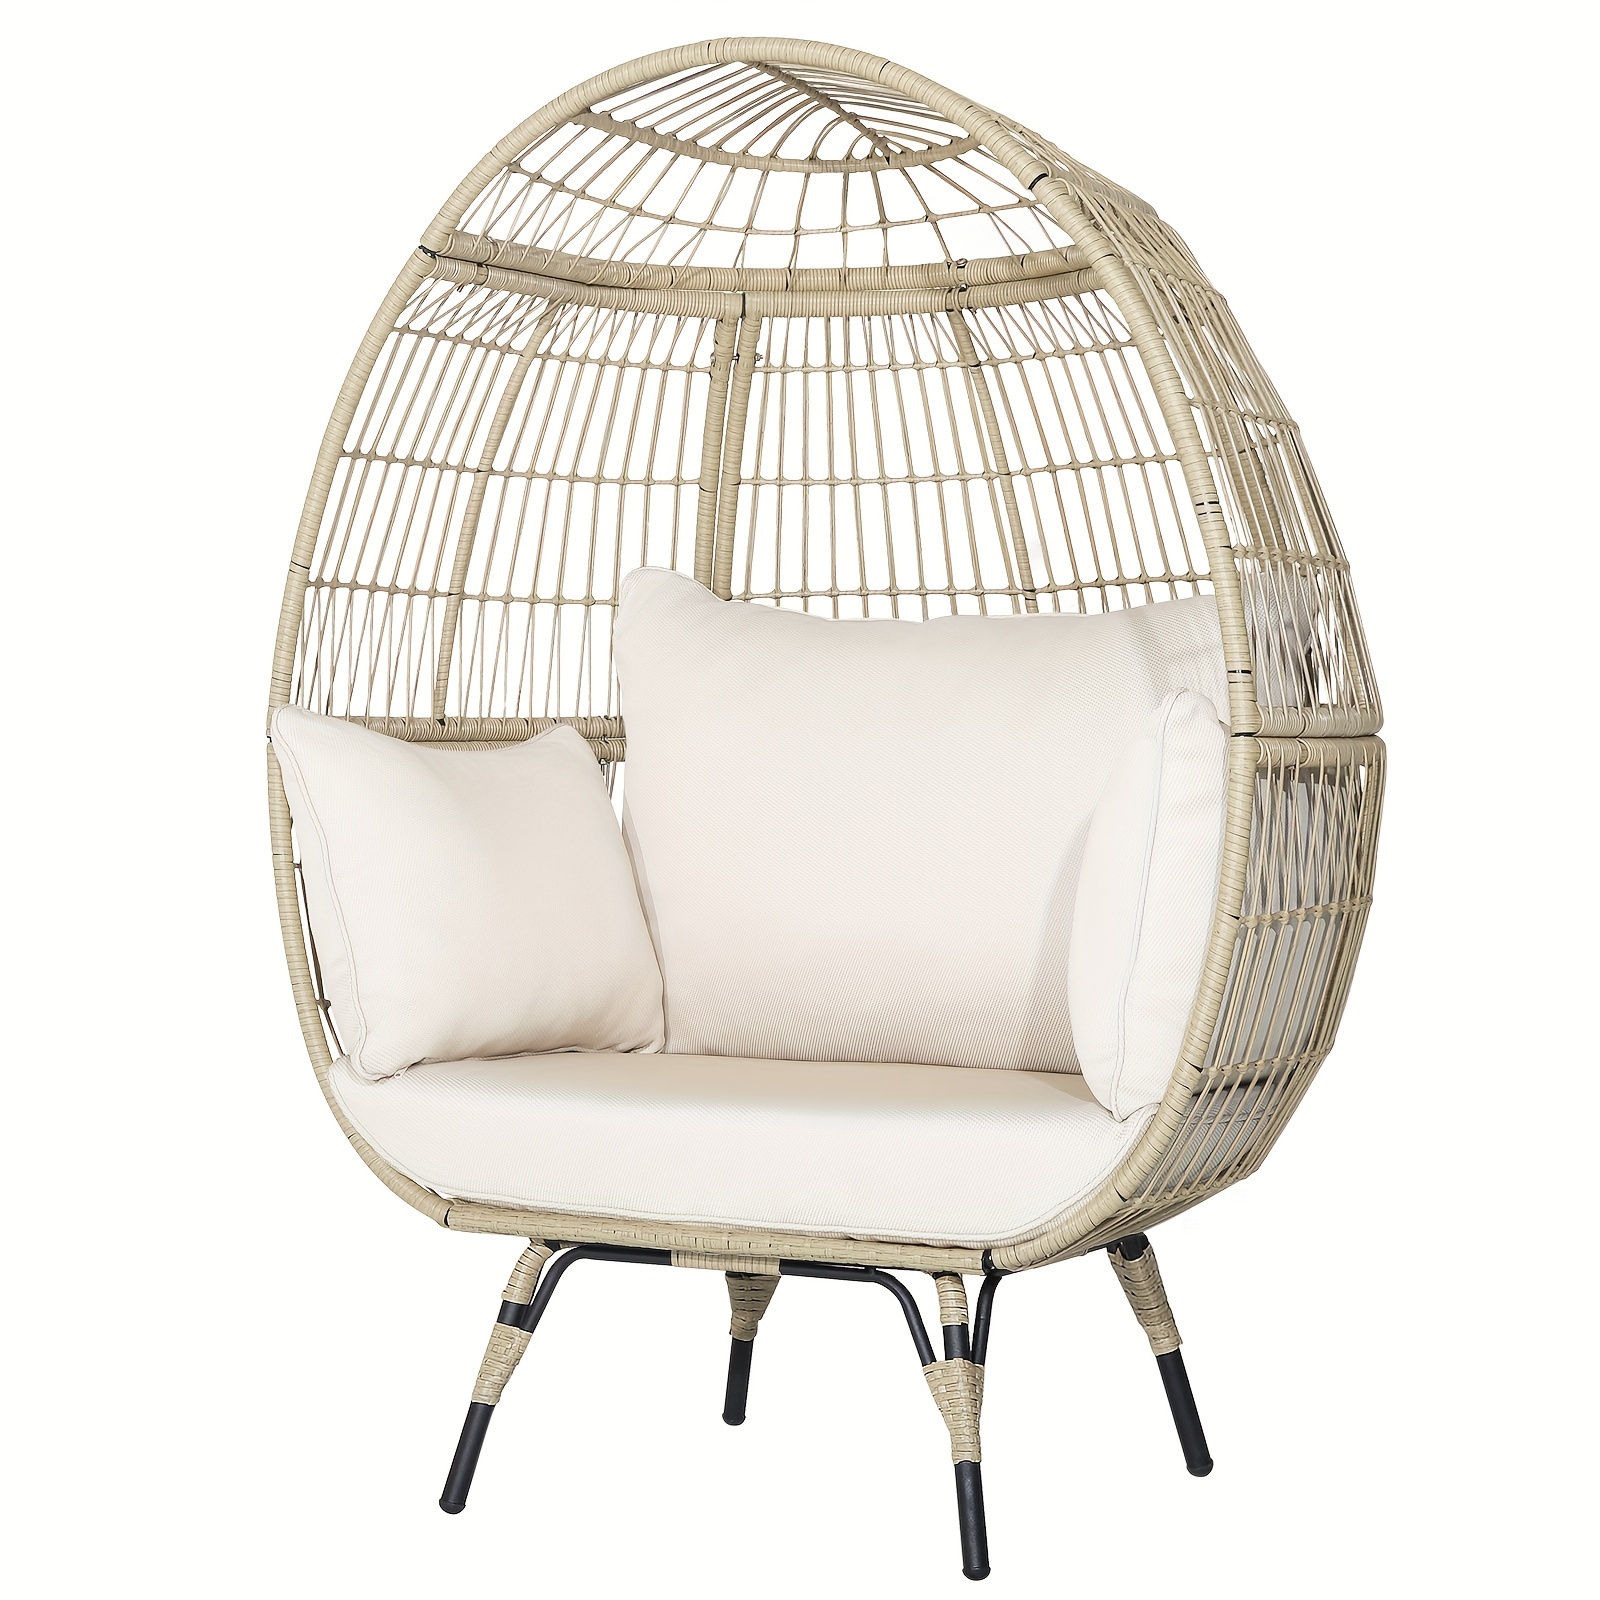 

1pc Rattan Egg Chair With Metal Frame For Patio, Oversized Indoor/outdoor Lounge Basket With 4 Cushions, Boho Chic Wicker Design, 57" High - Neutral Tones